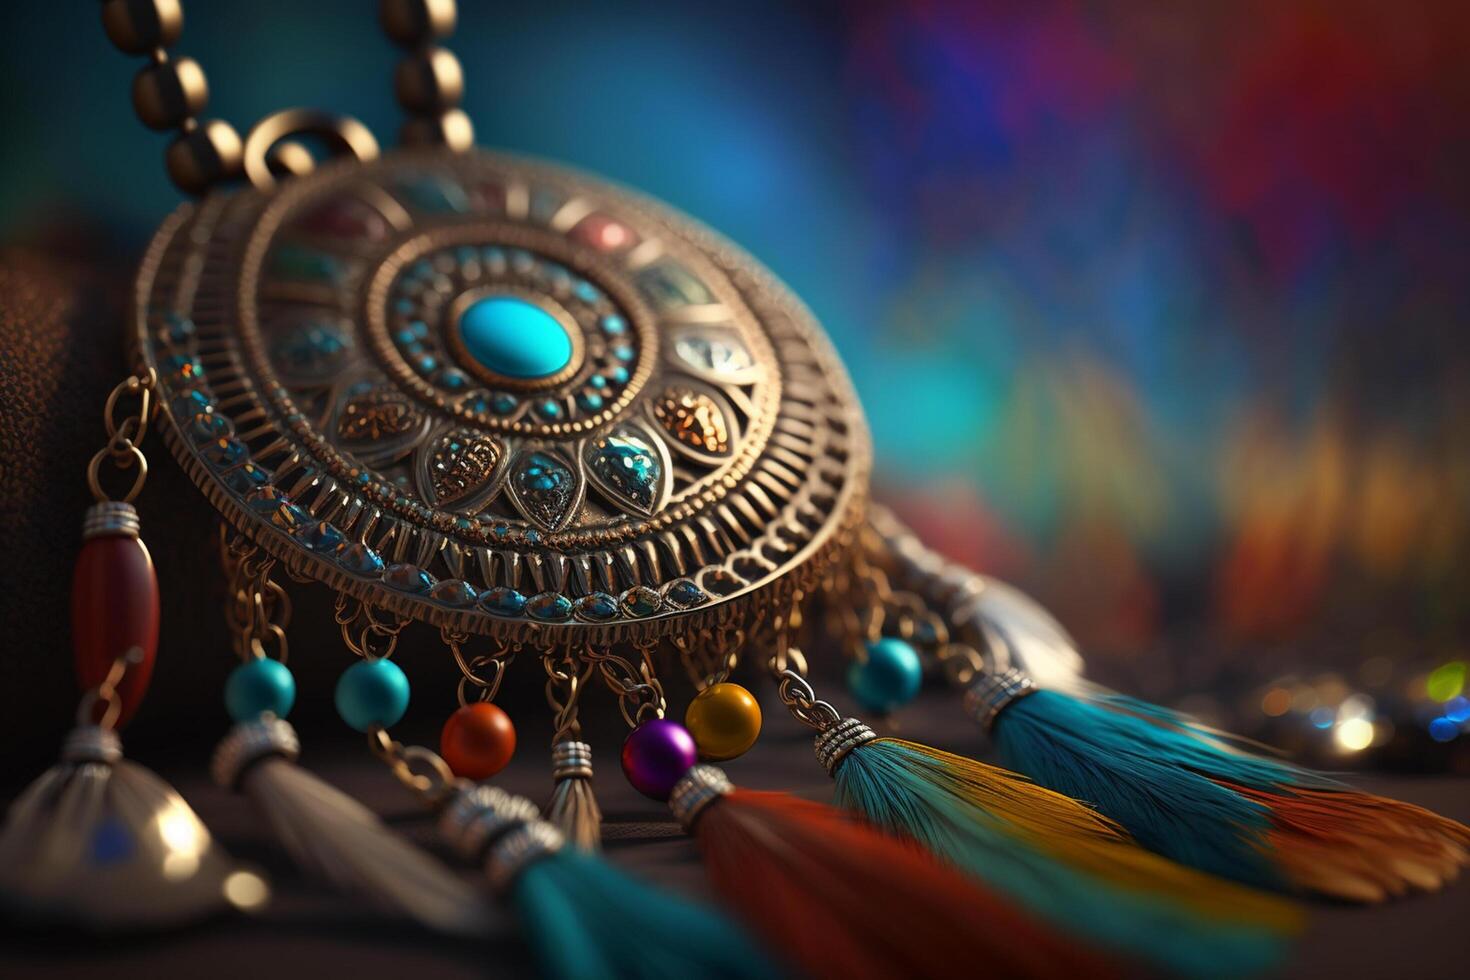 Hippie - Indian Jewelry - Ethnic Accessories for Free-Spirited Fashionistas photo